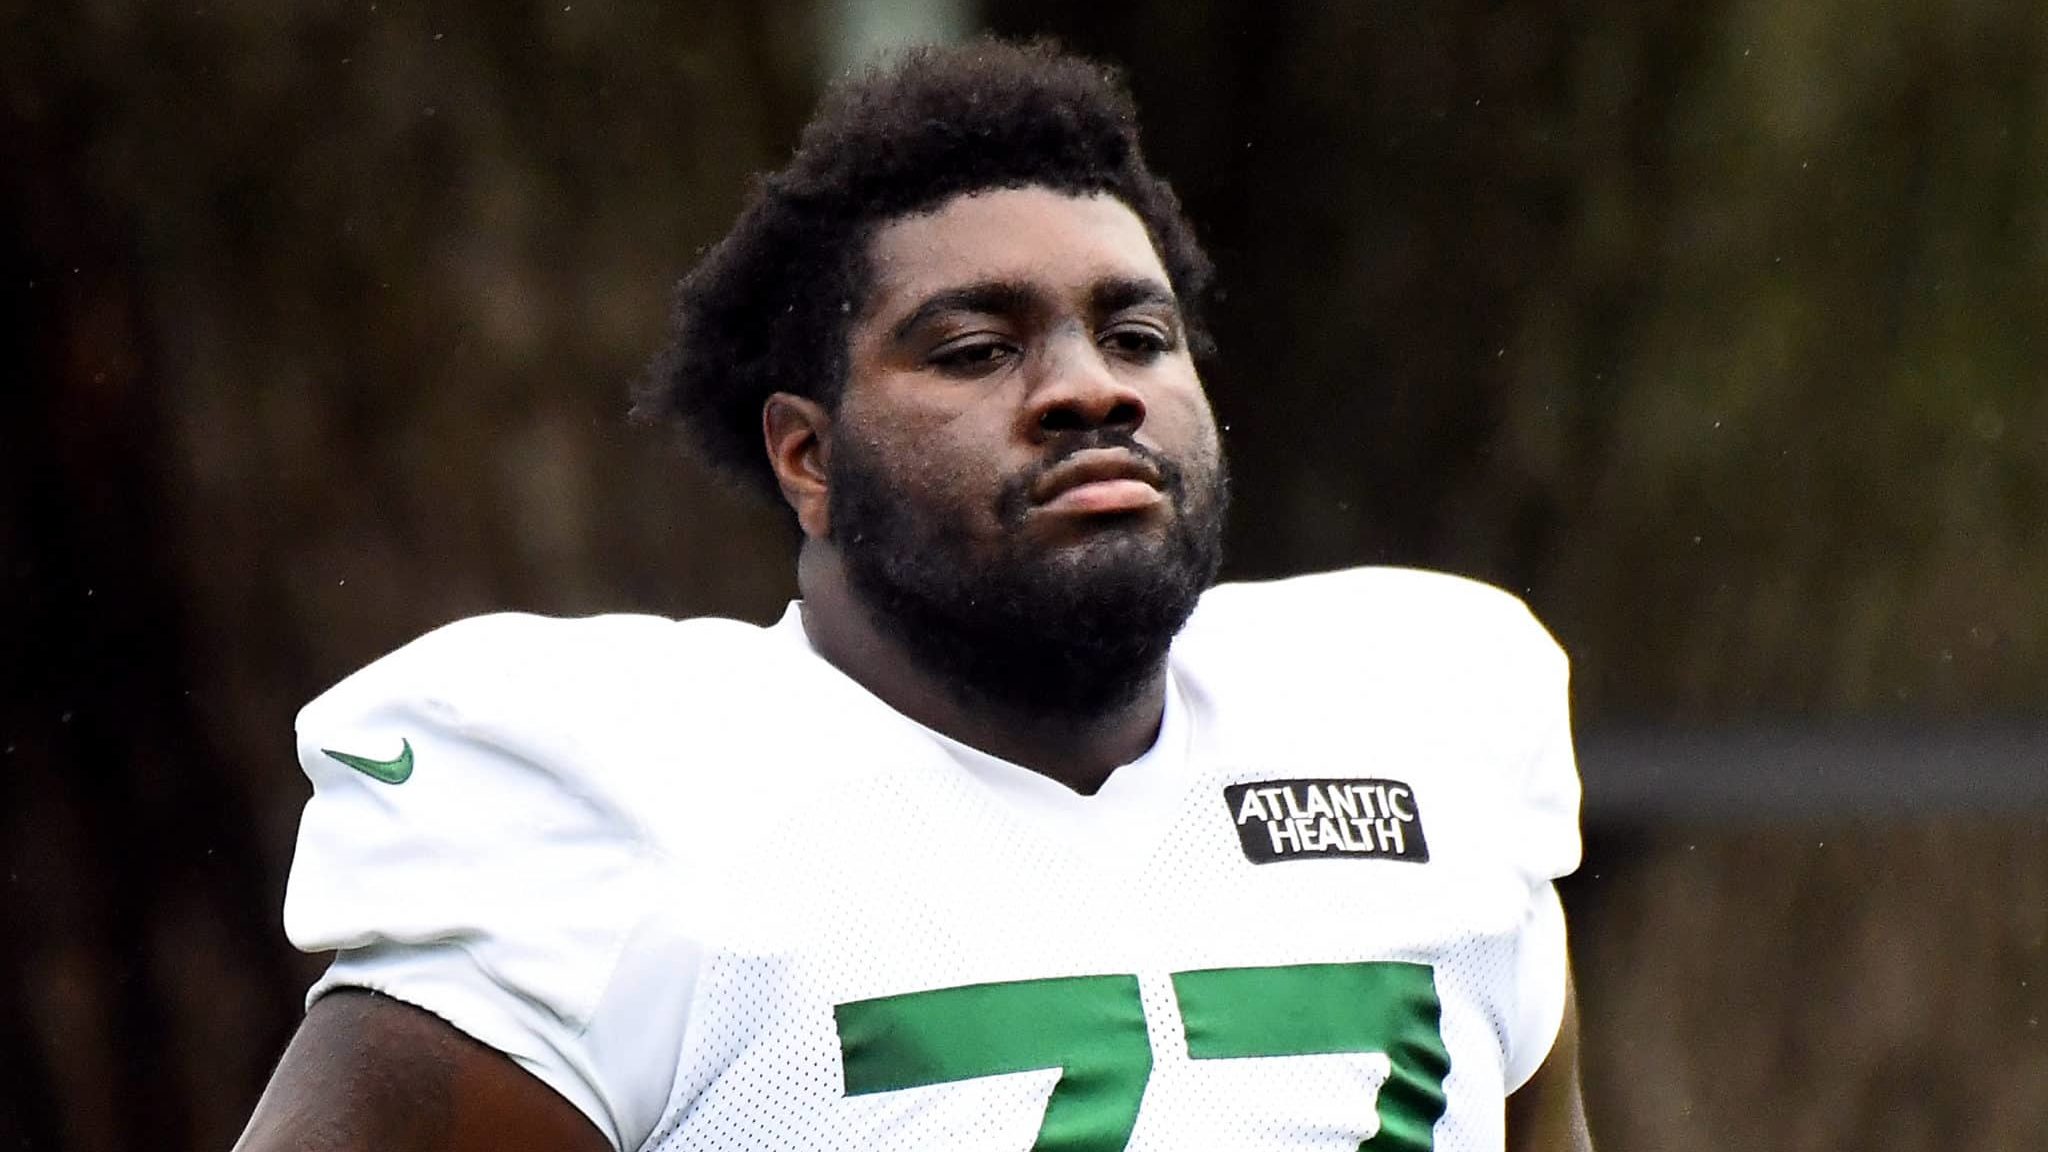 FLORHAM PARK, NEW JERSEY - AUGUST 19: Mekhi Becton #77 of the New York Jets looks on during training camp at Atlantic Health Jets Training Center on August 19, 2020 in Florham Park, New Jersey.